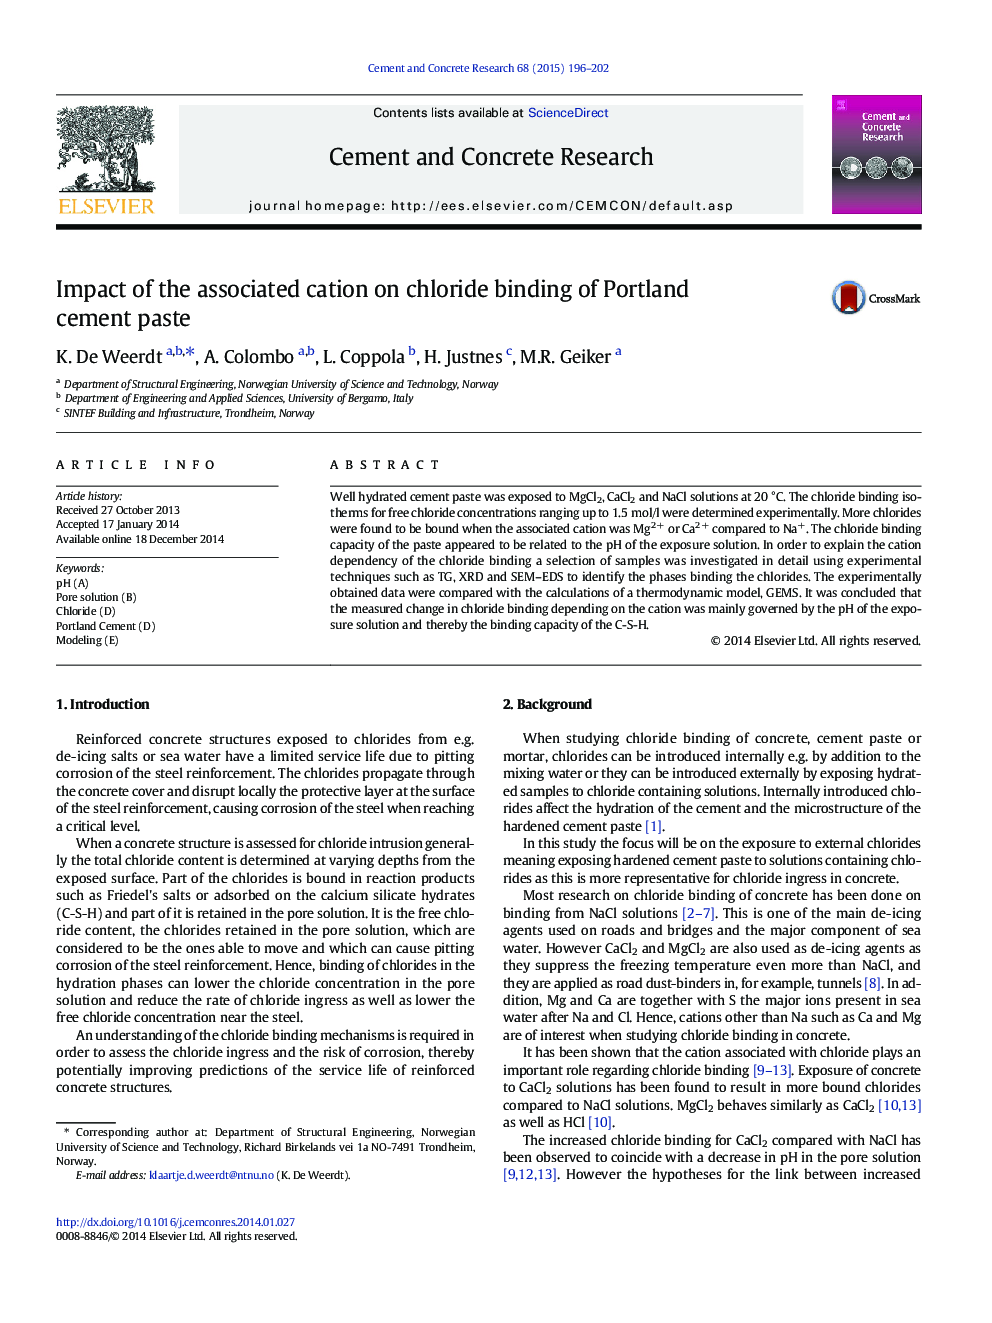 Impact of the associated cation on chloride binding of Portland cement paste